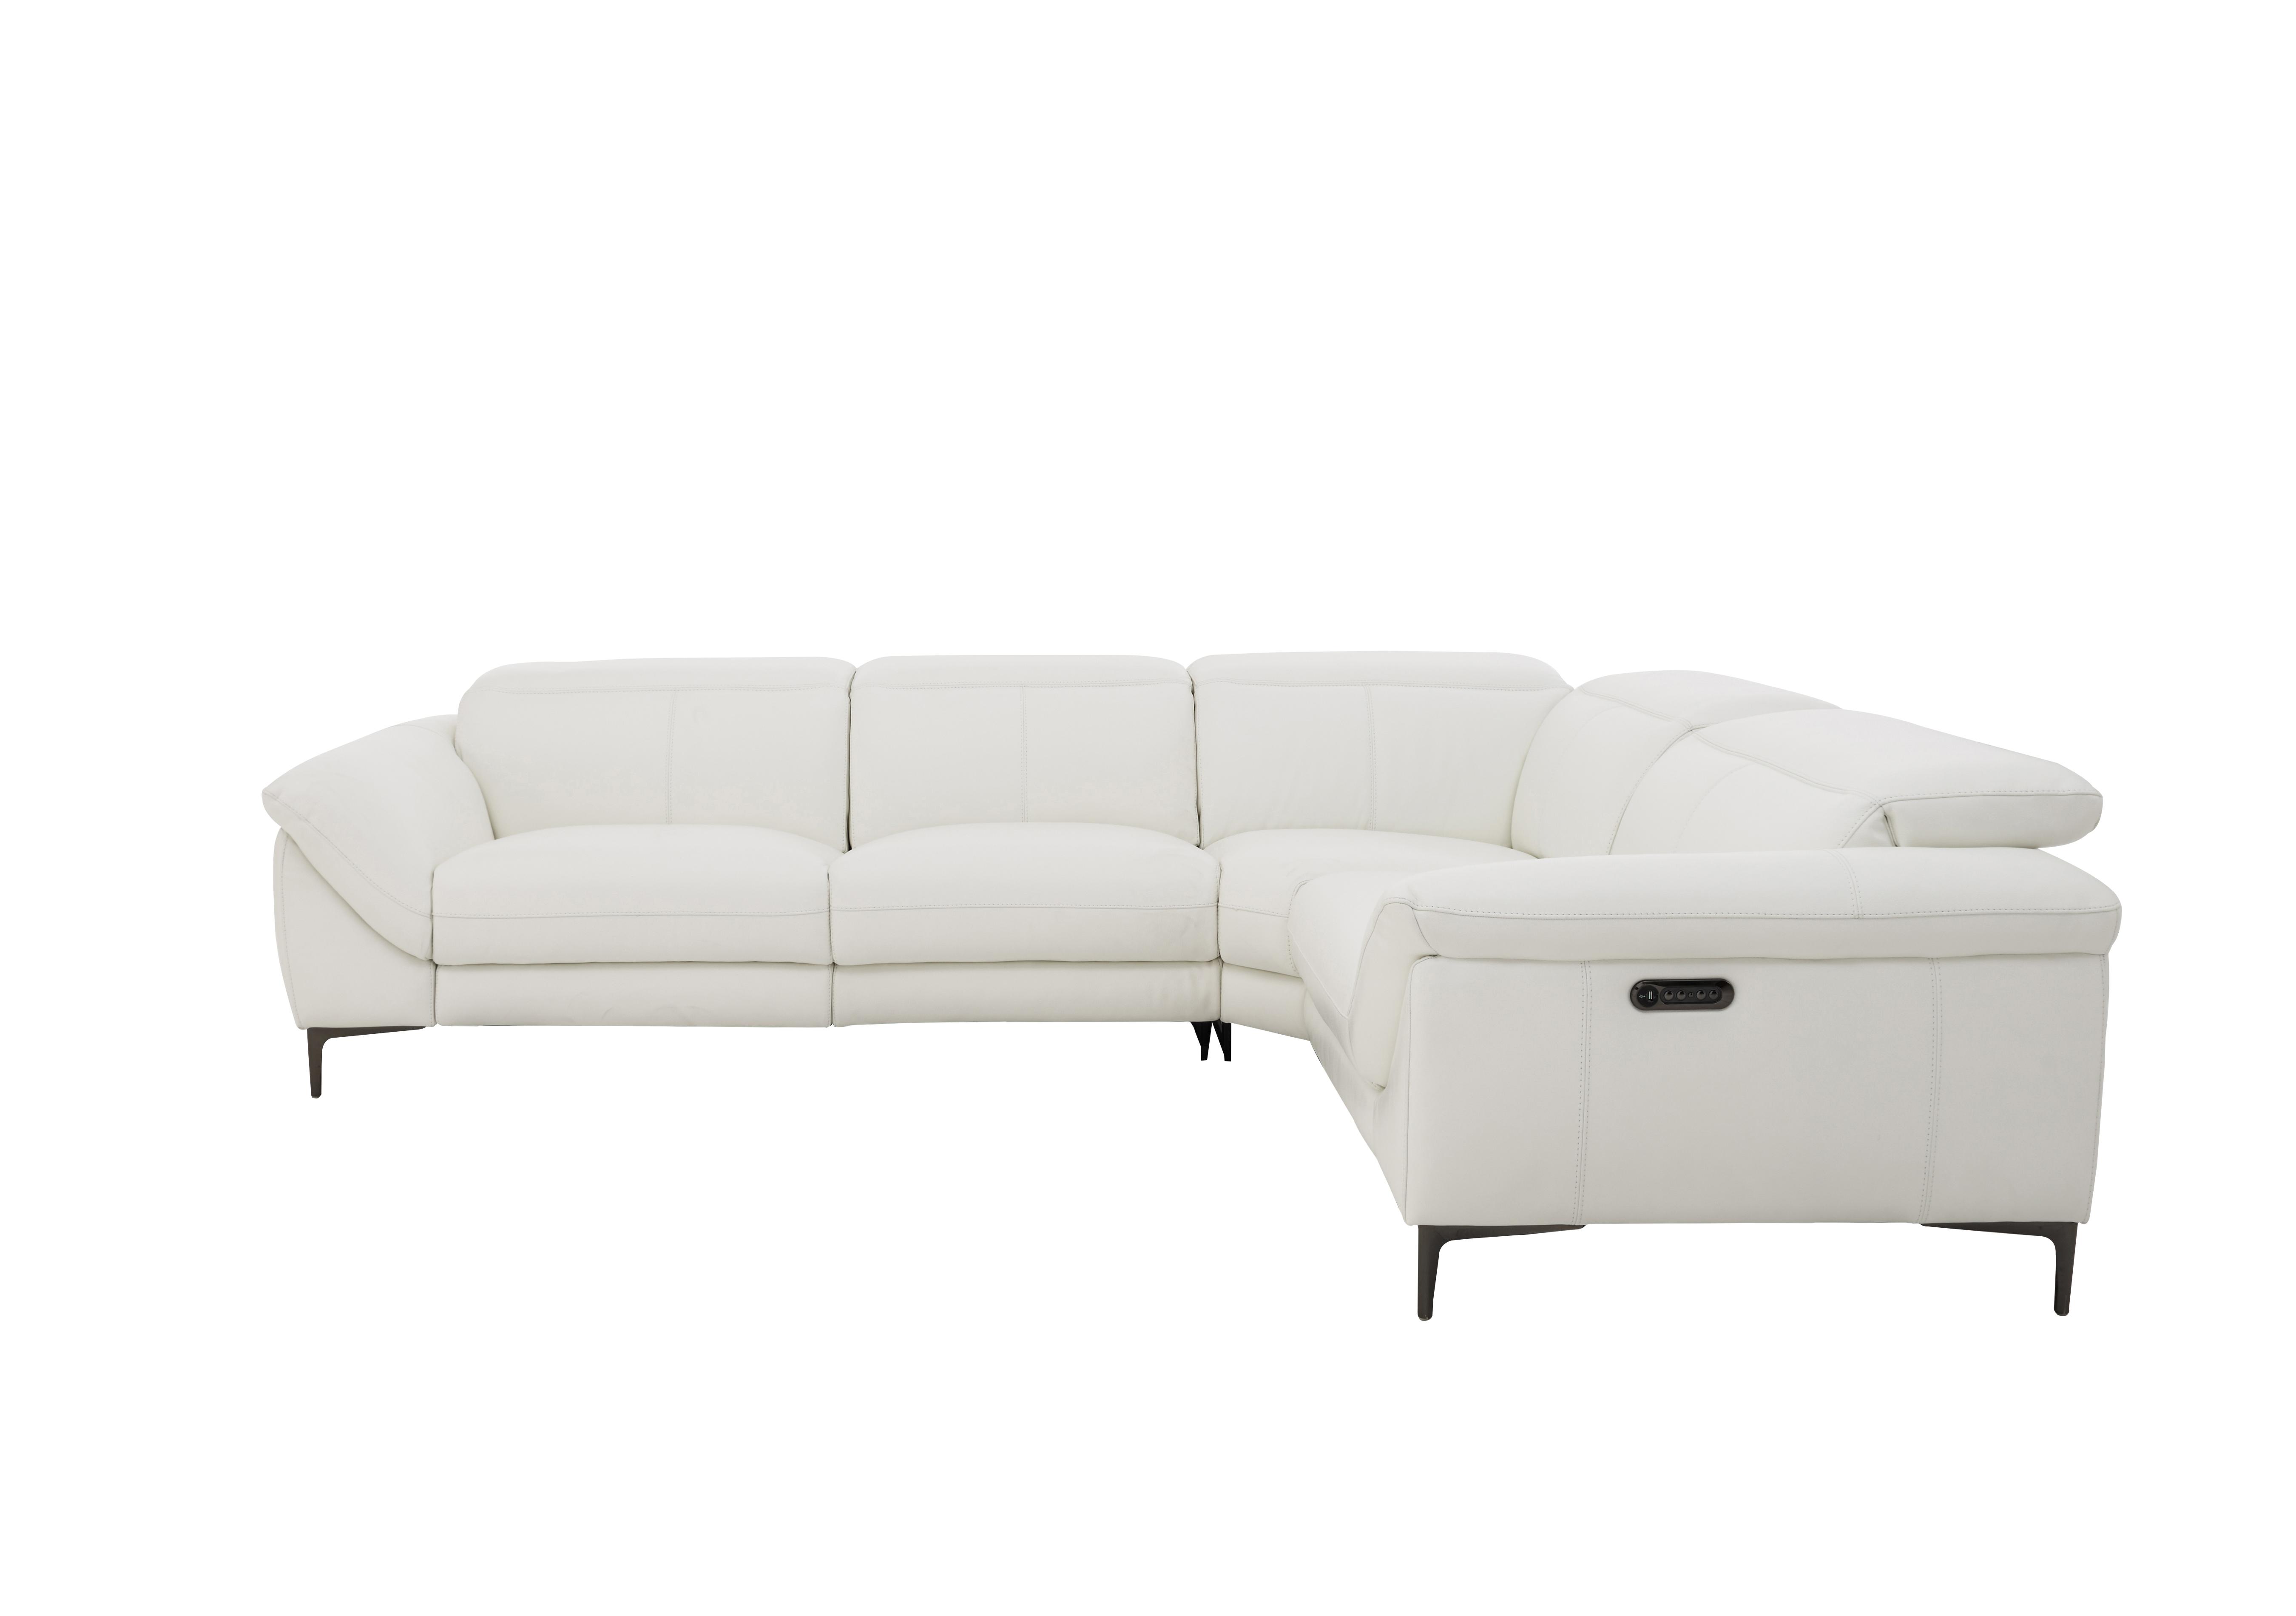 galaxy leather sofa & loveseat review